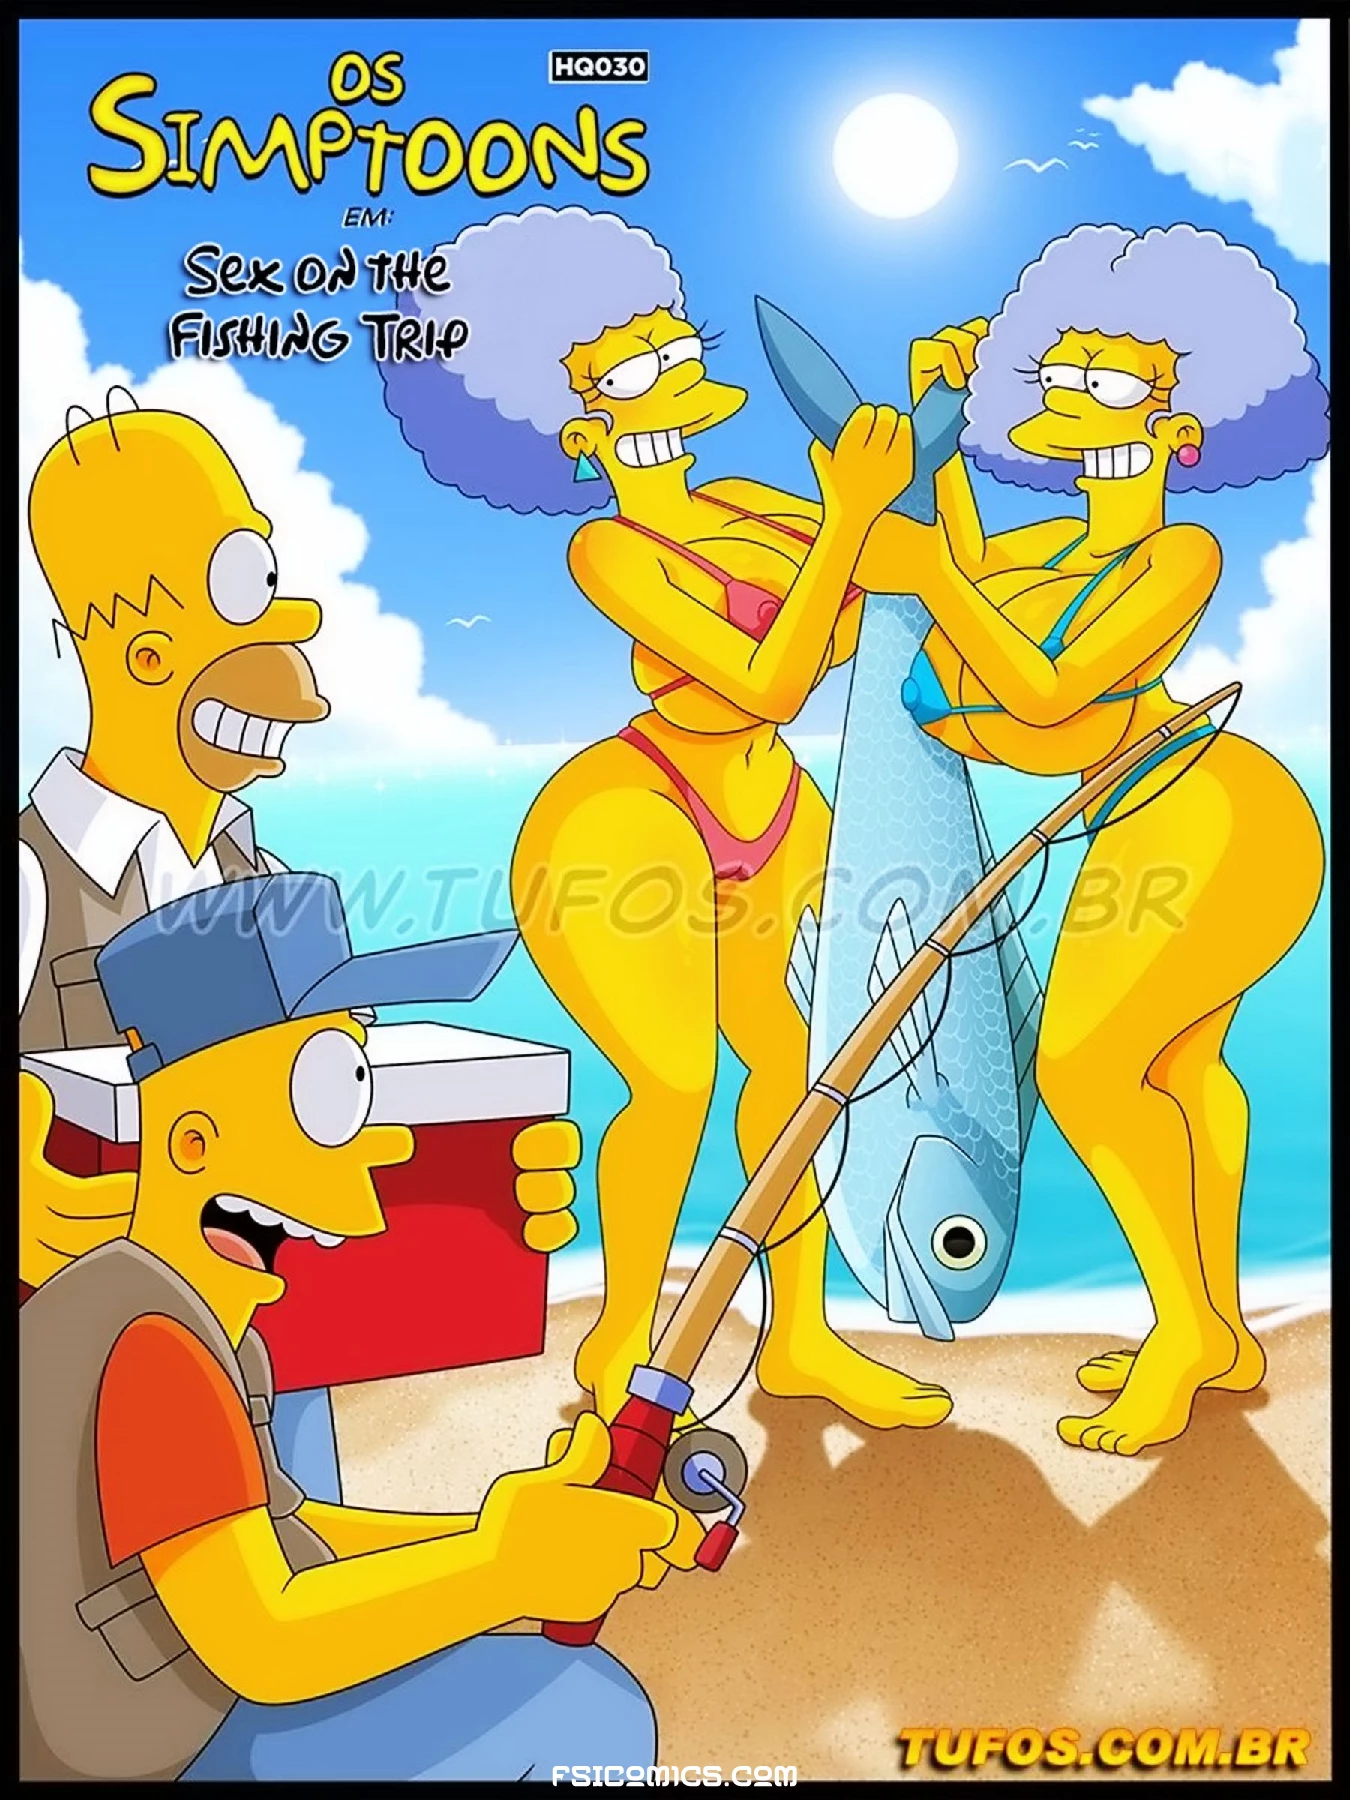 The Simpsons Chapter 30 – Sex on the Fishing Trip – WC TF - 7 - FSIComics